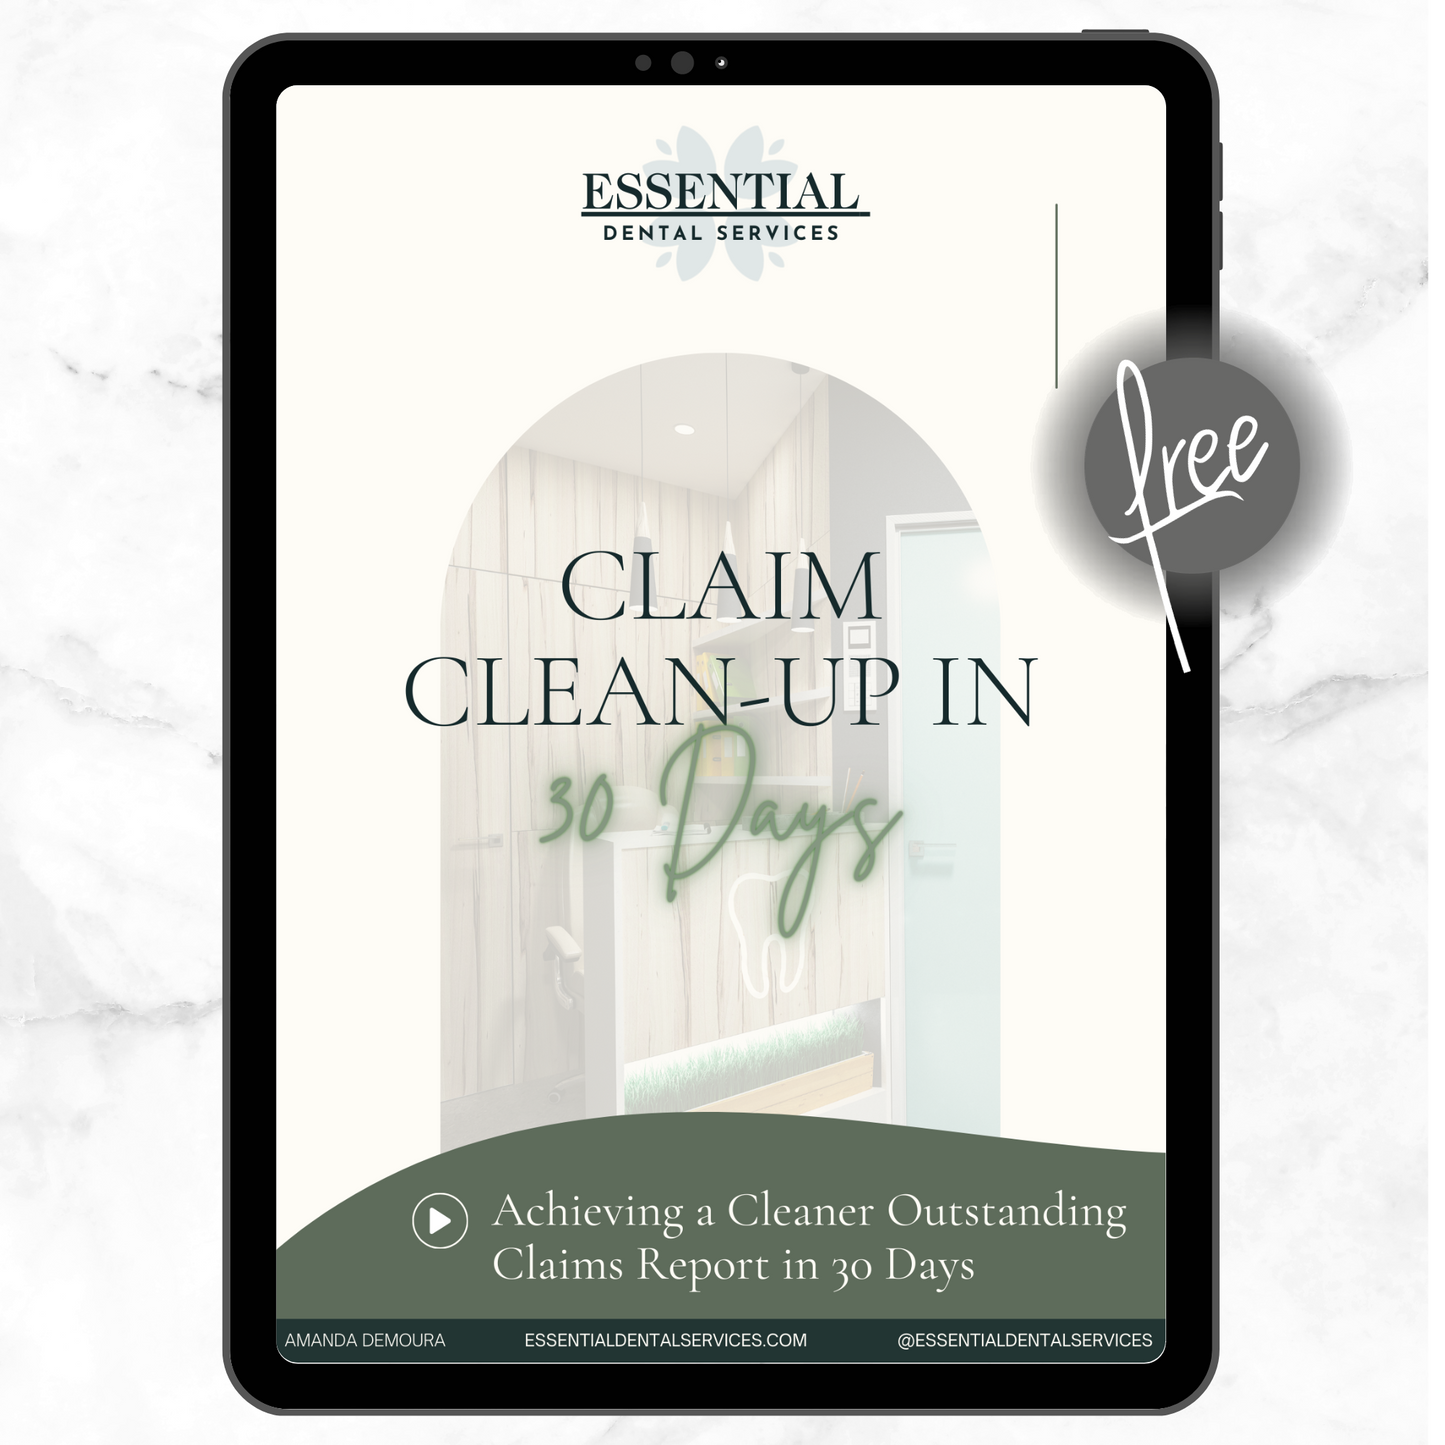 Claim Clean-Up in 30 Days